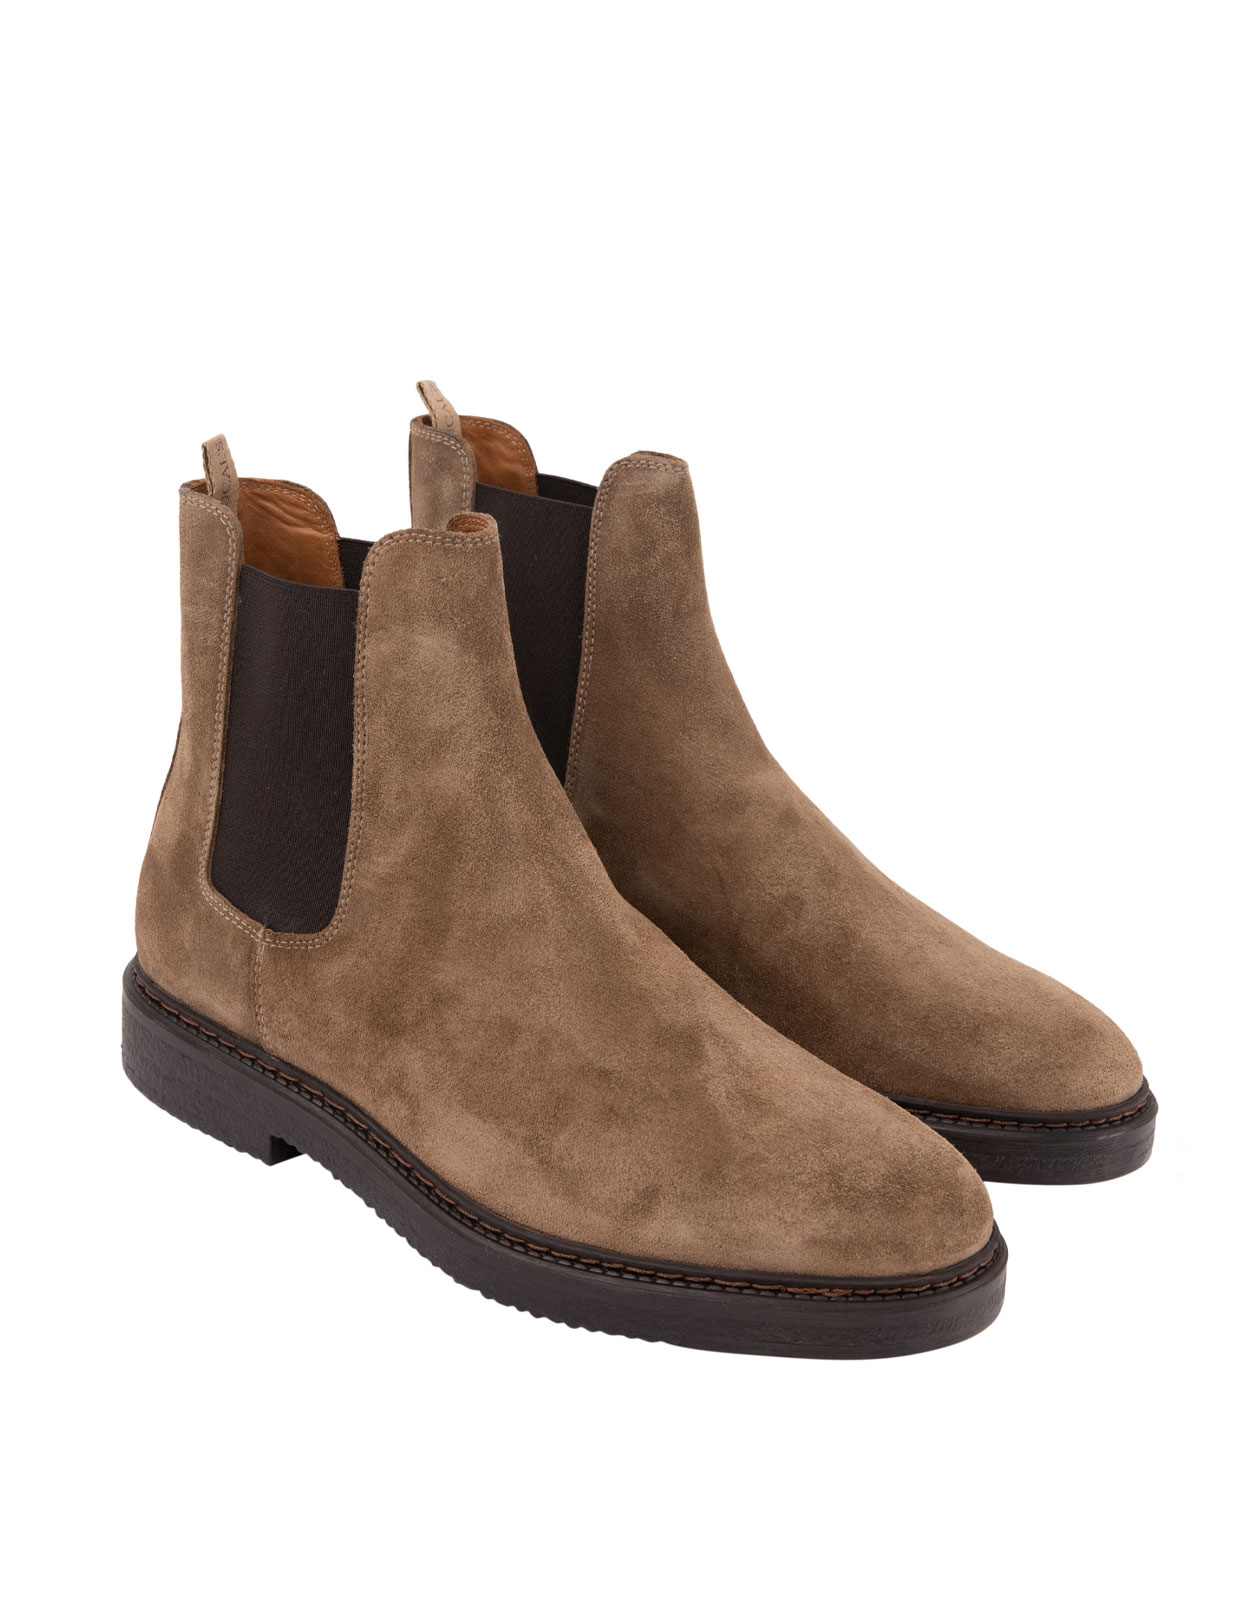 Chelsea Boots Tabacco Stl 40.5